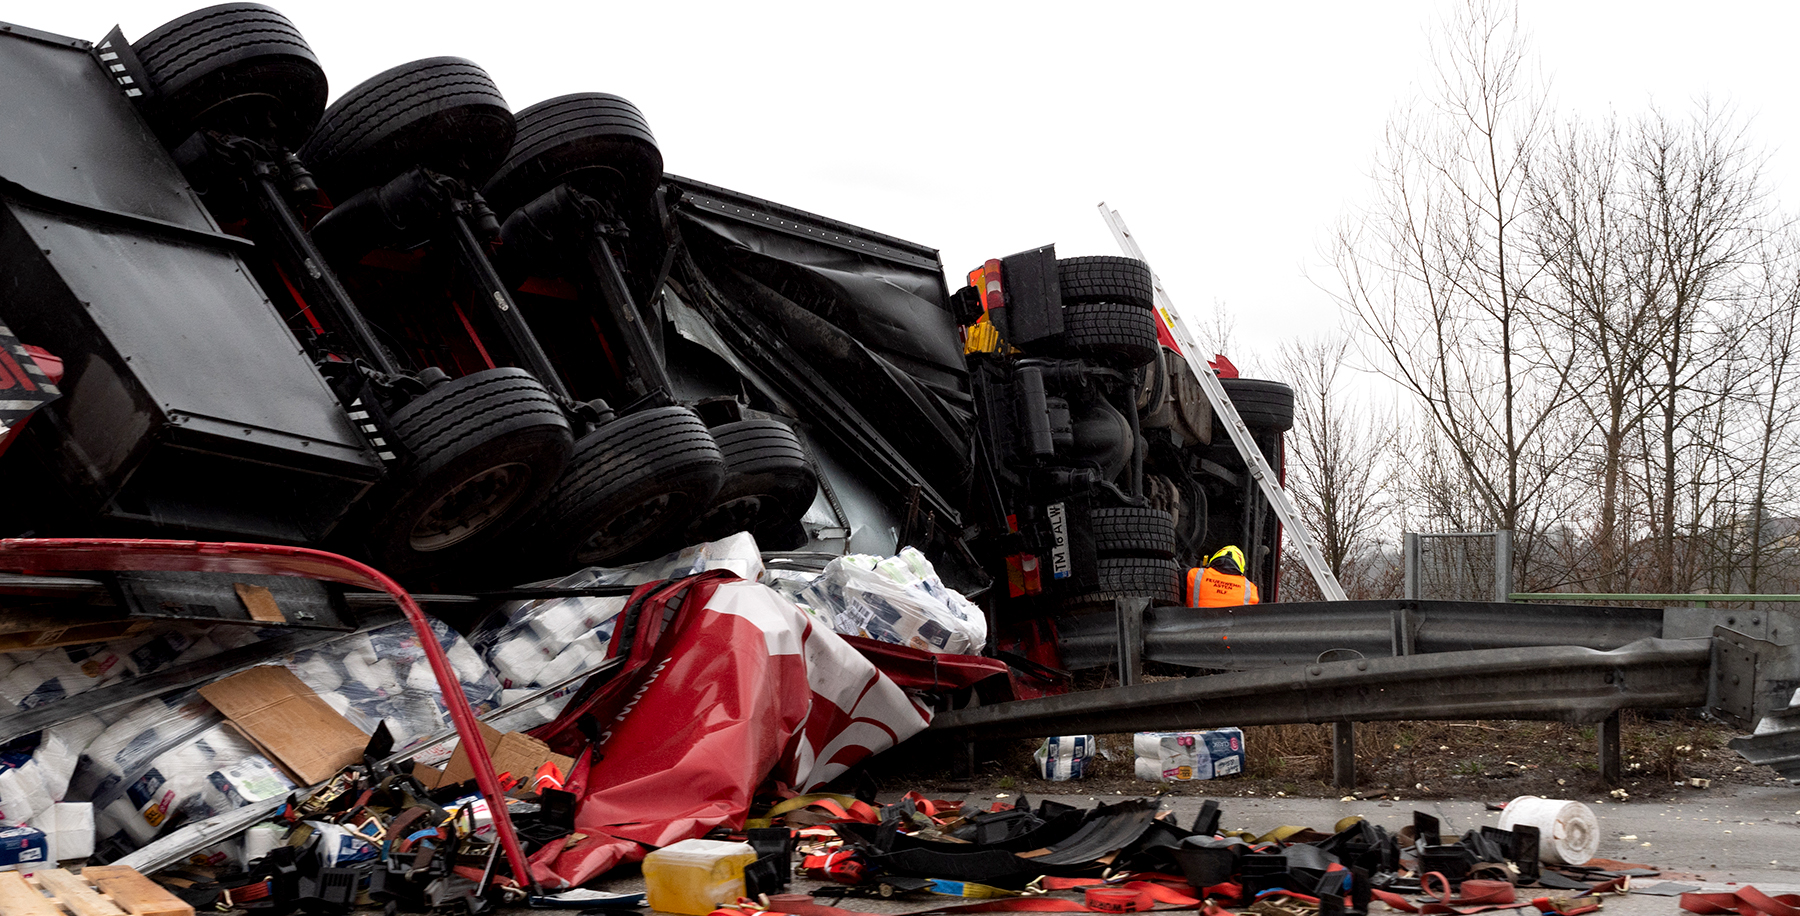 Recovering Compensation Following a Truck Accident Injury